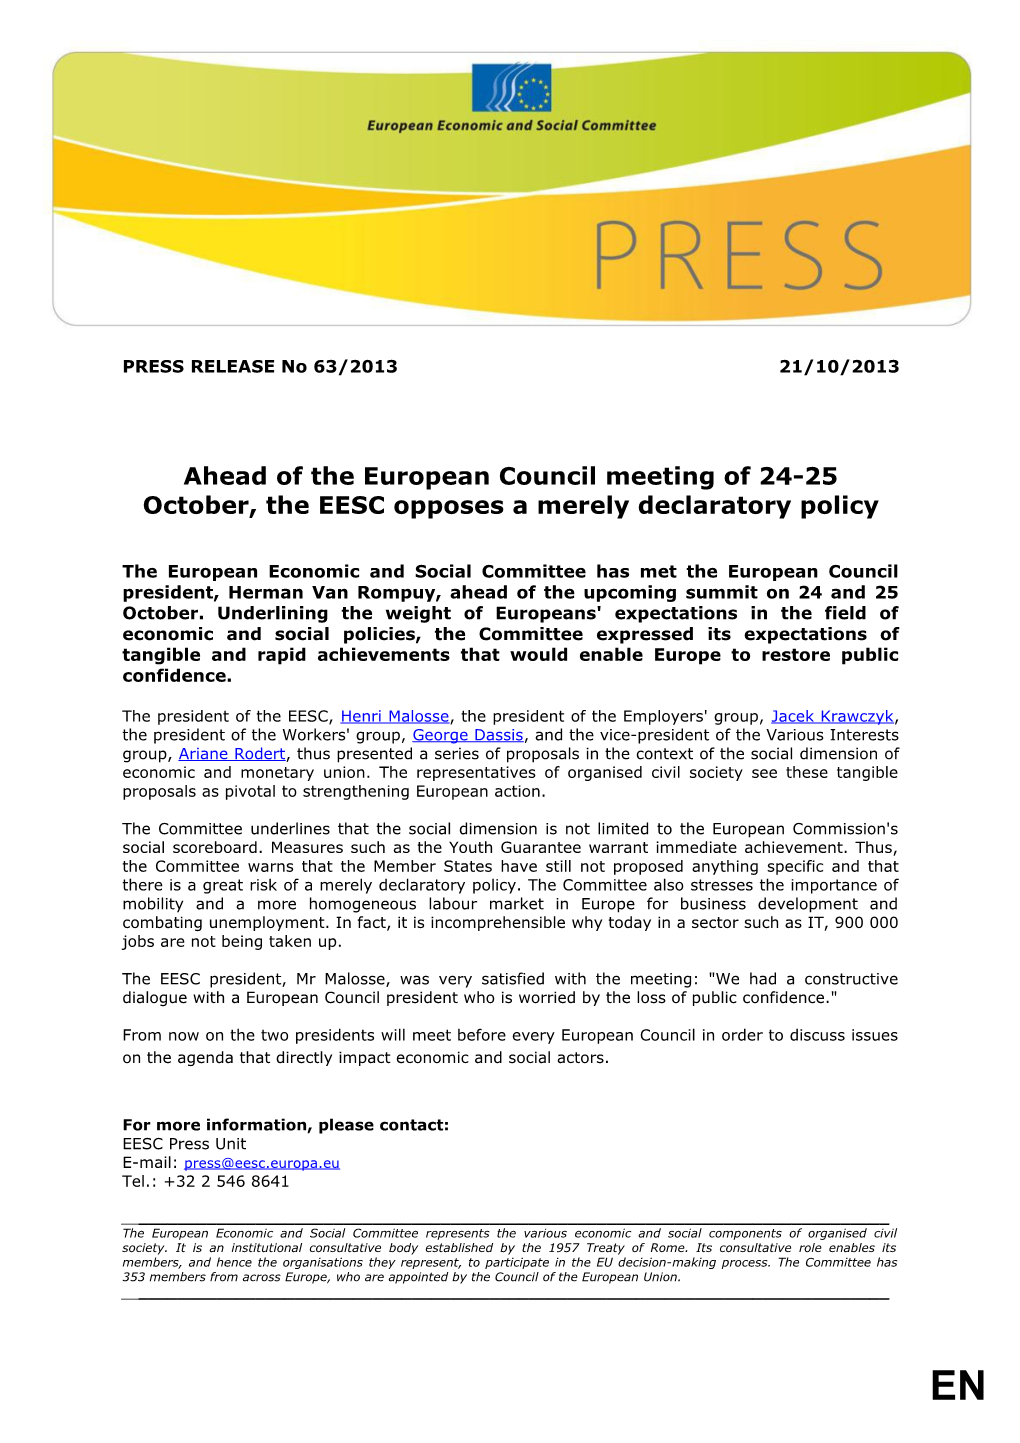 Ahead of the European Council Meeting of 24-25 October, the EESC Opposes a Merely Declaratory